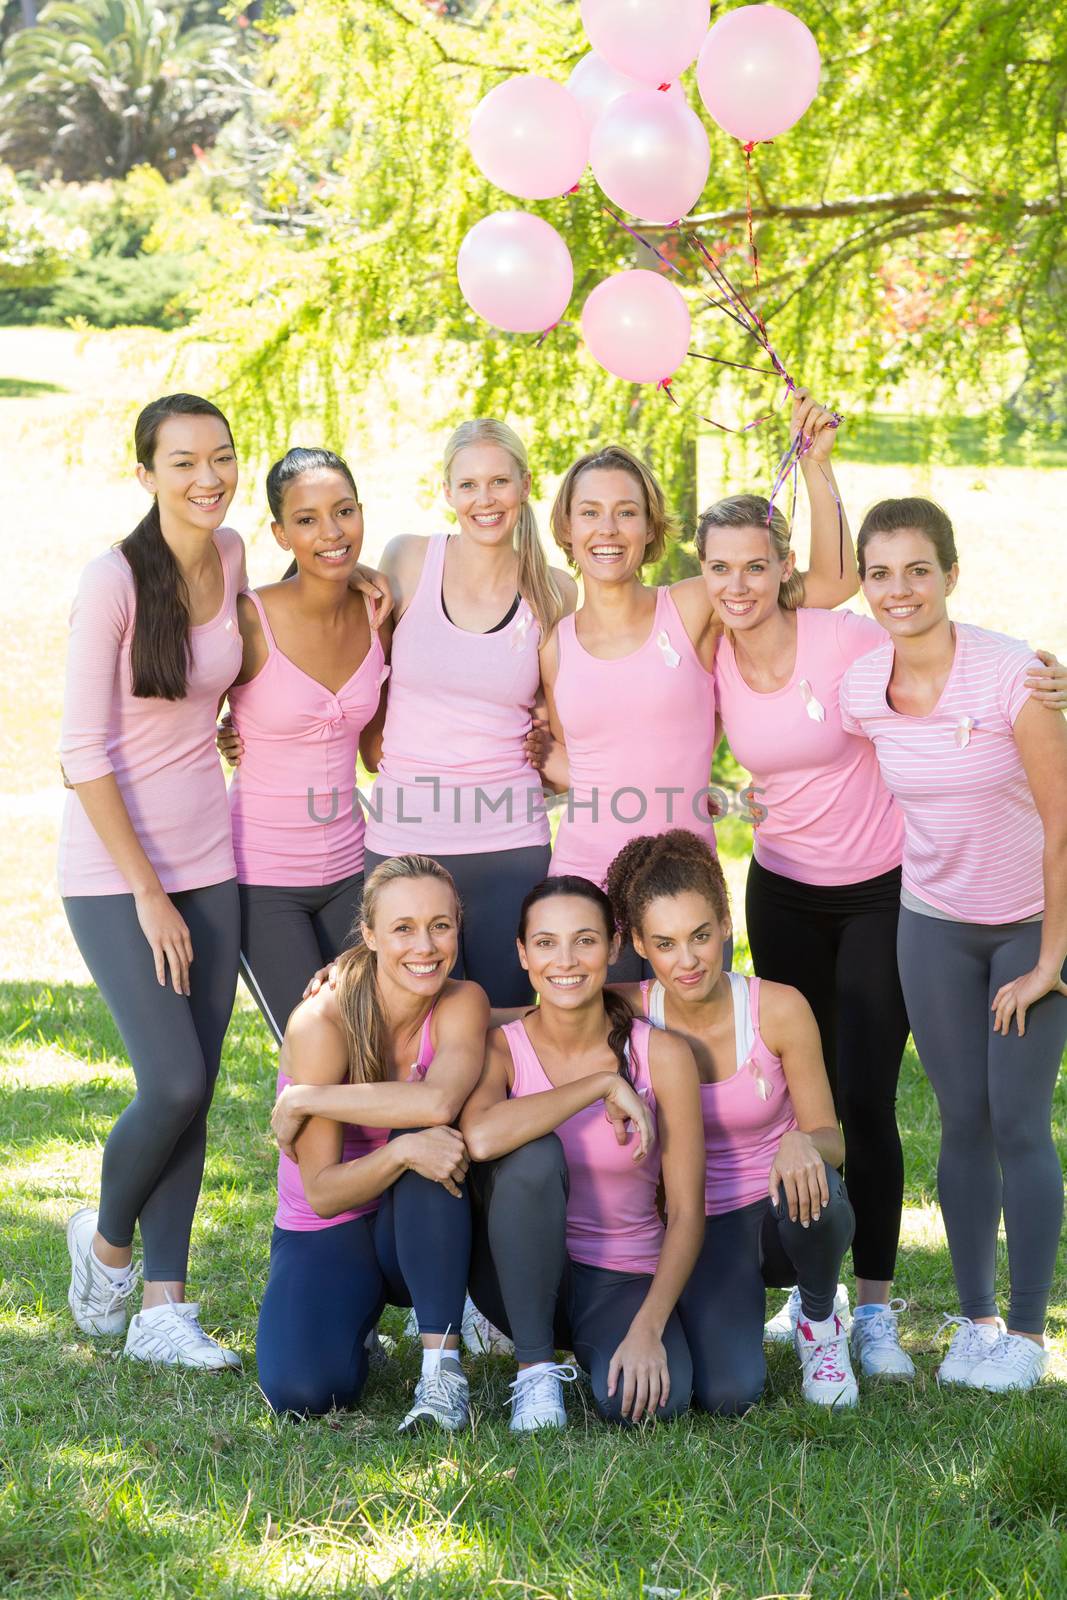 Smiling women in pink for breast cancer awareness by Wavebreakmedia